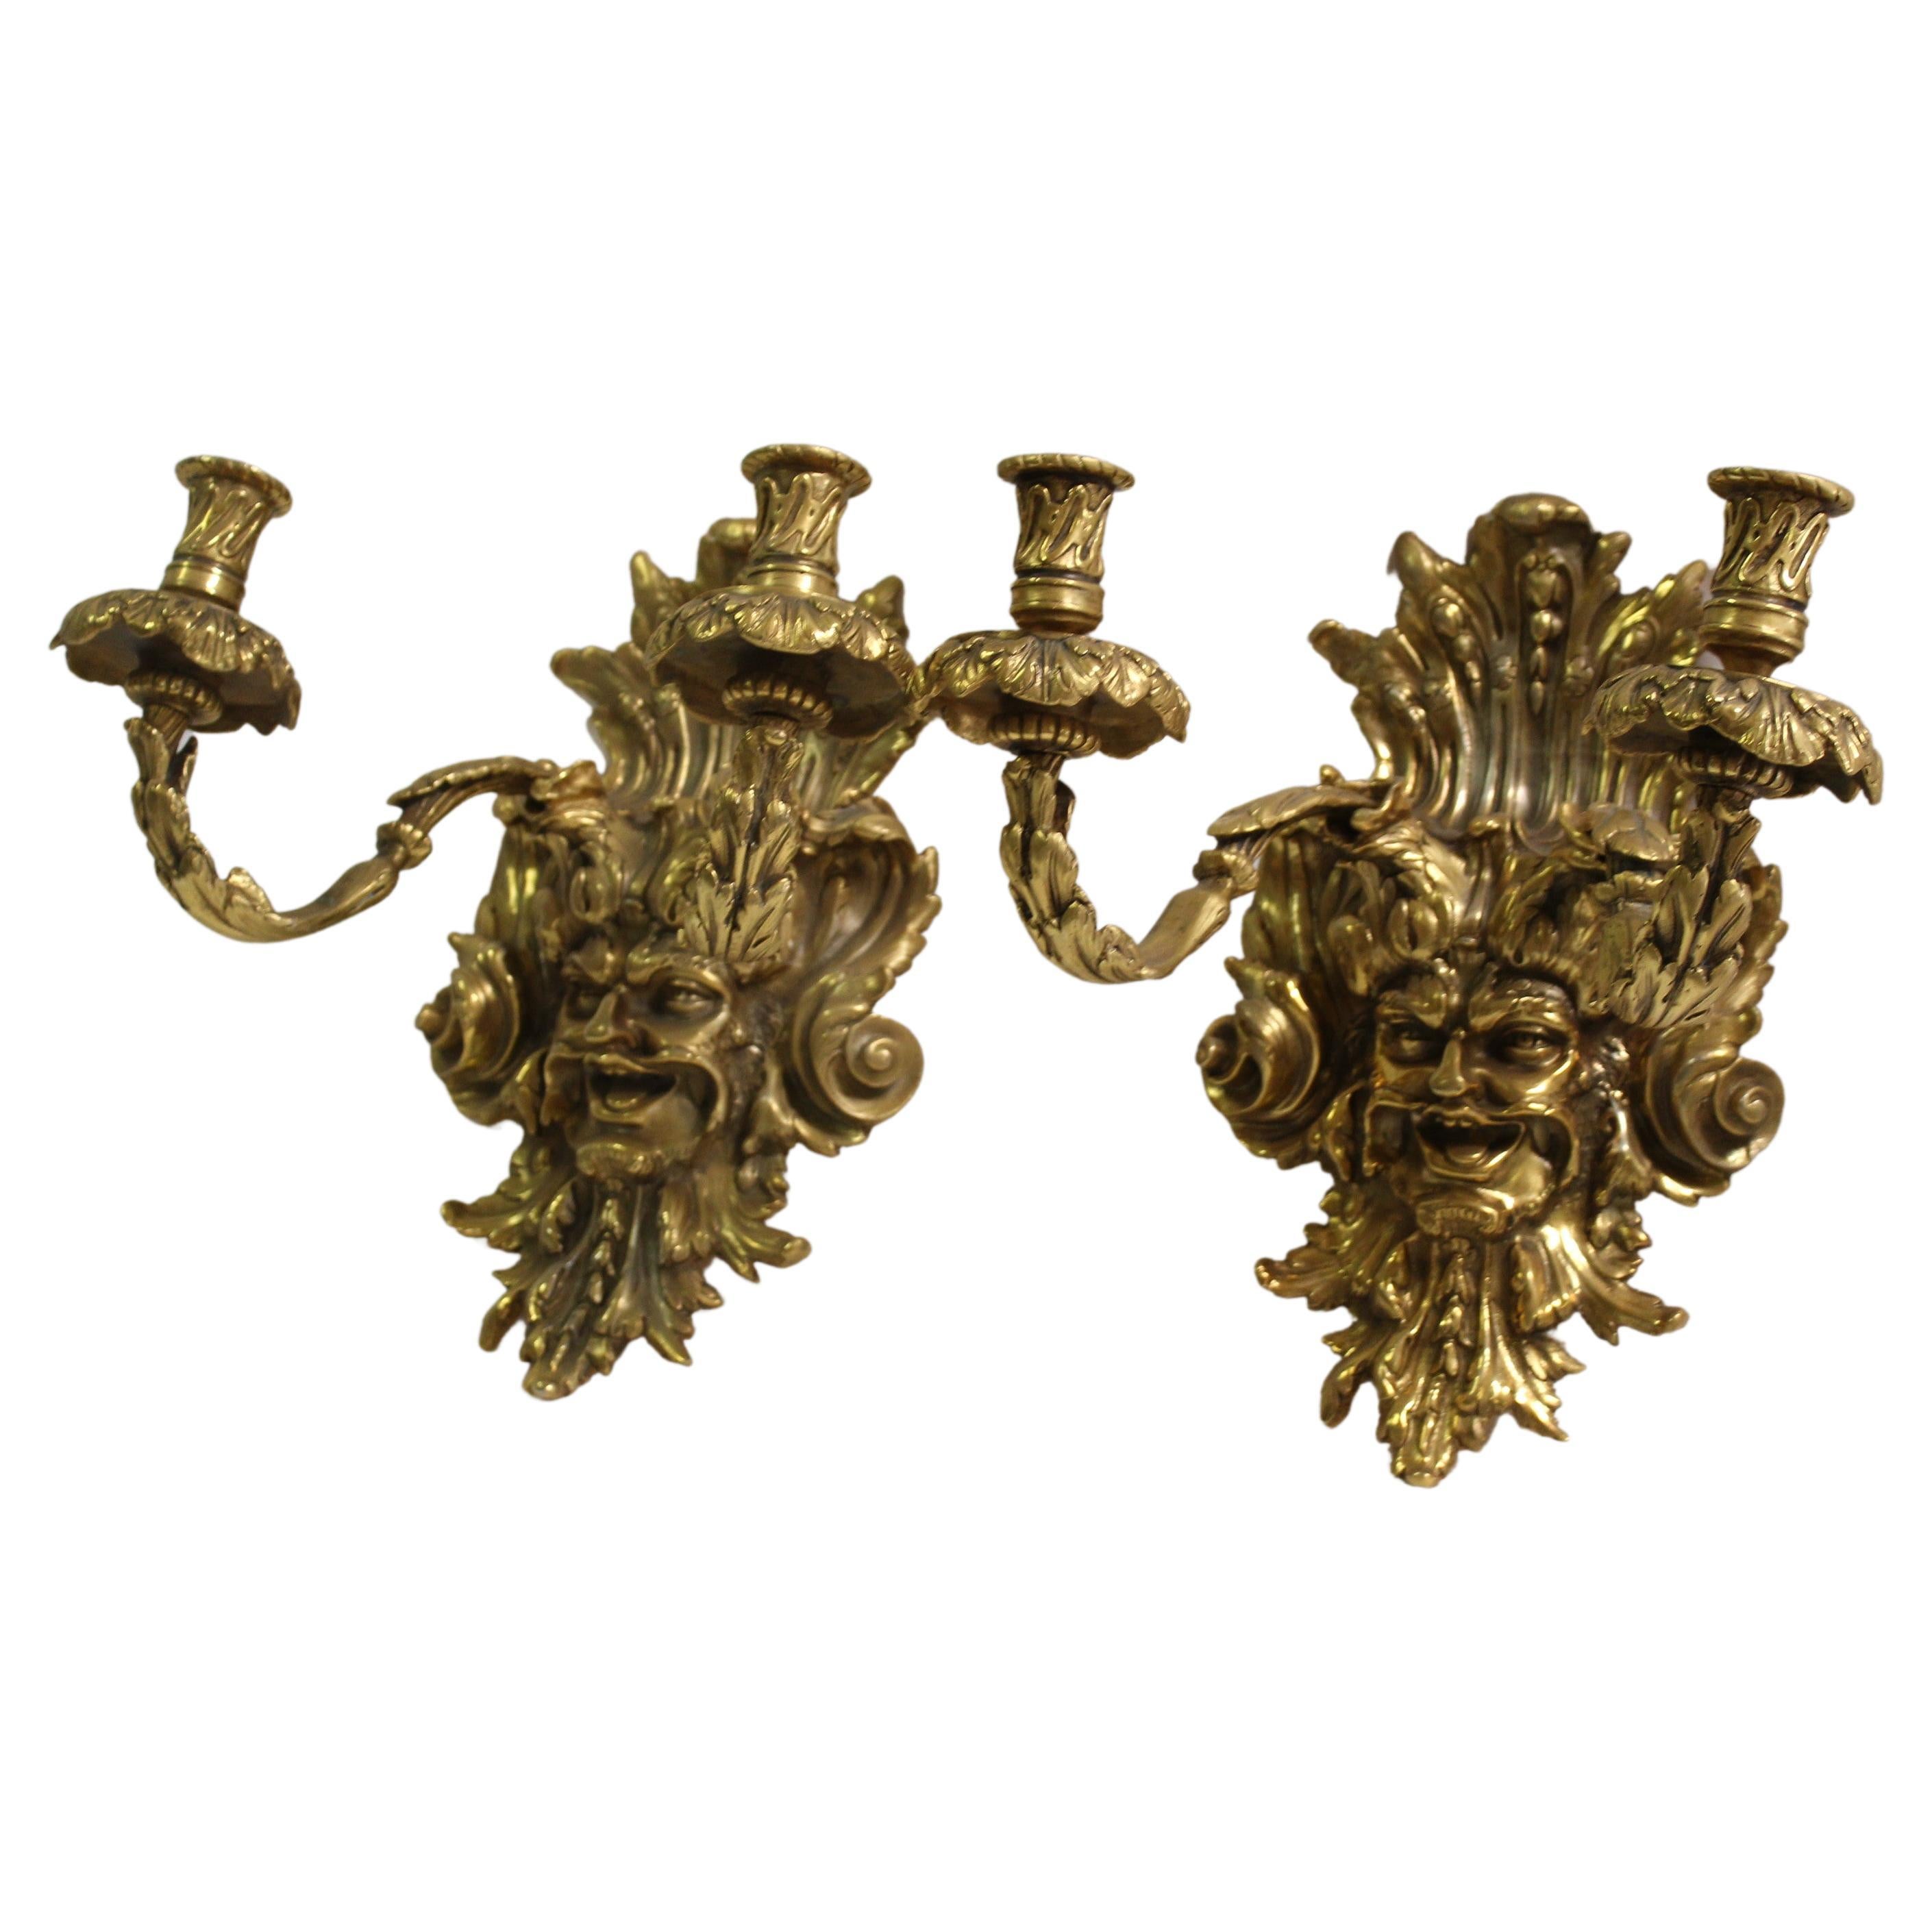 Empire Sconces W Grotesque Man's Face, Gold Finish, After Empire 2 Arms For Sale